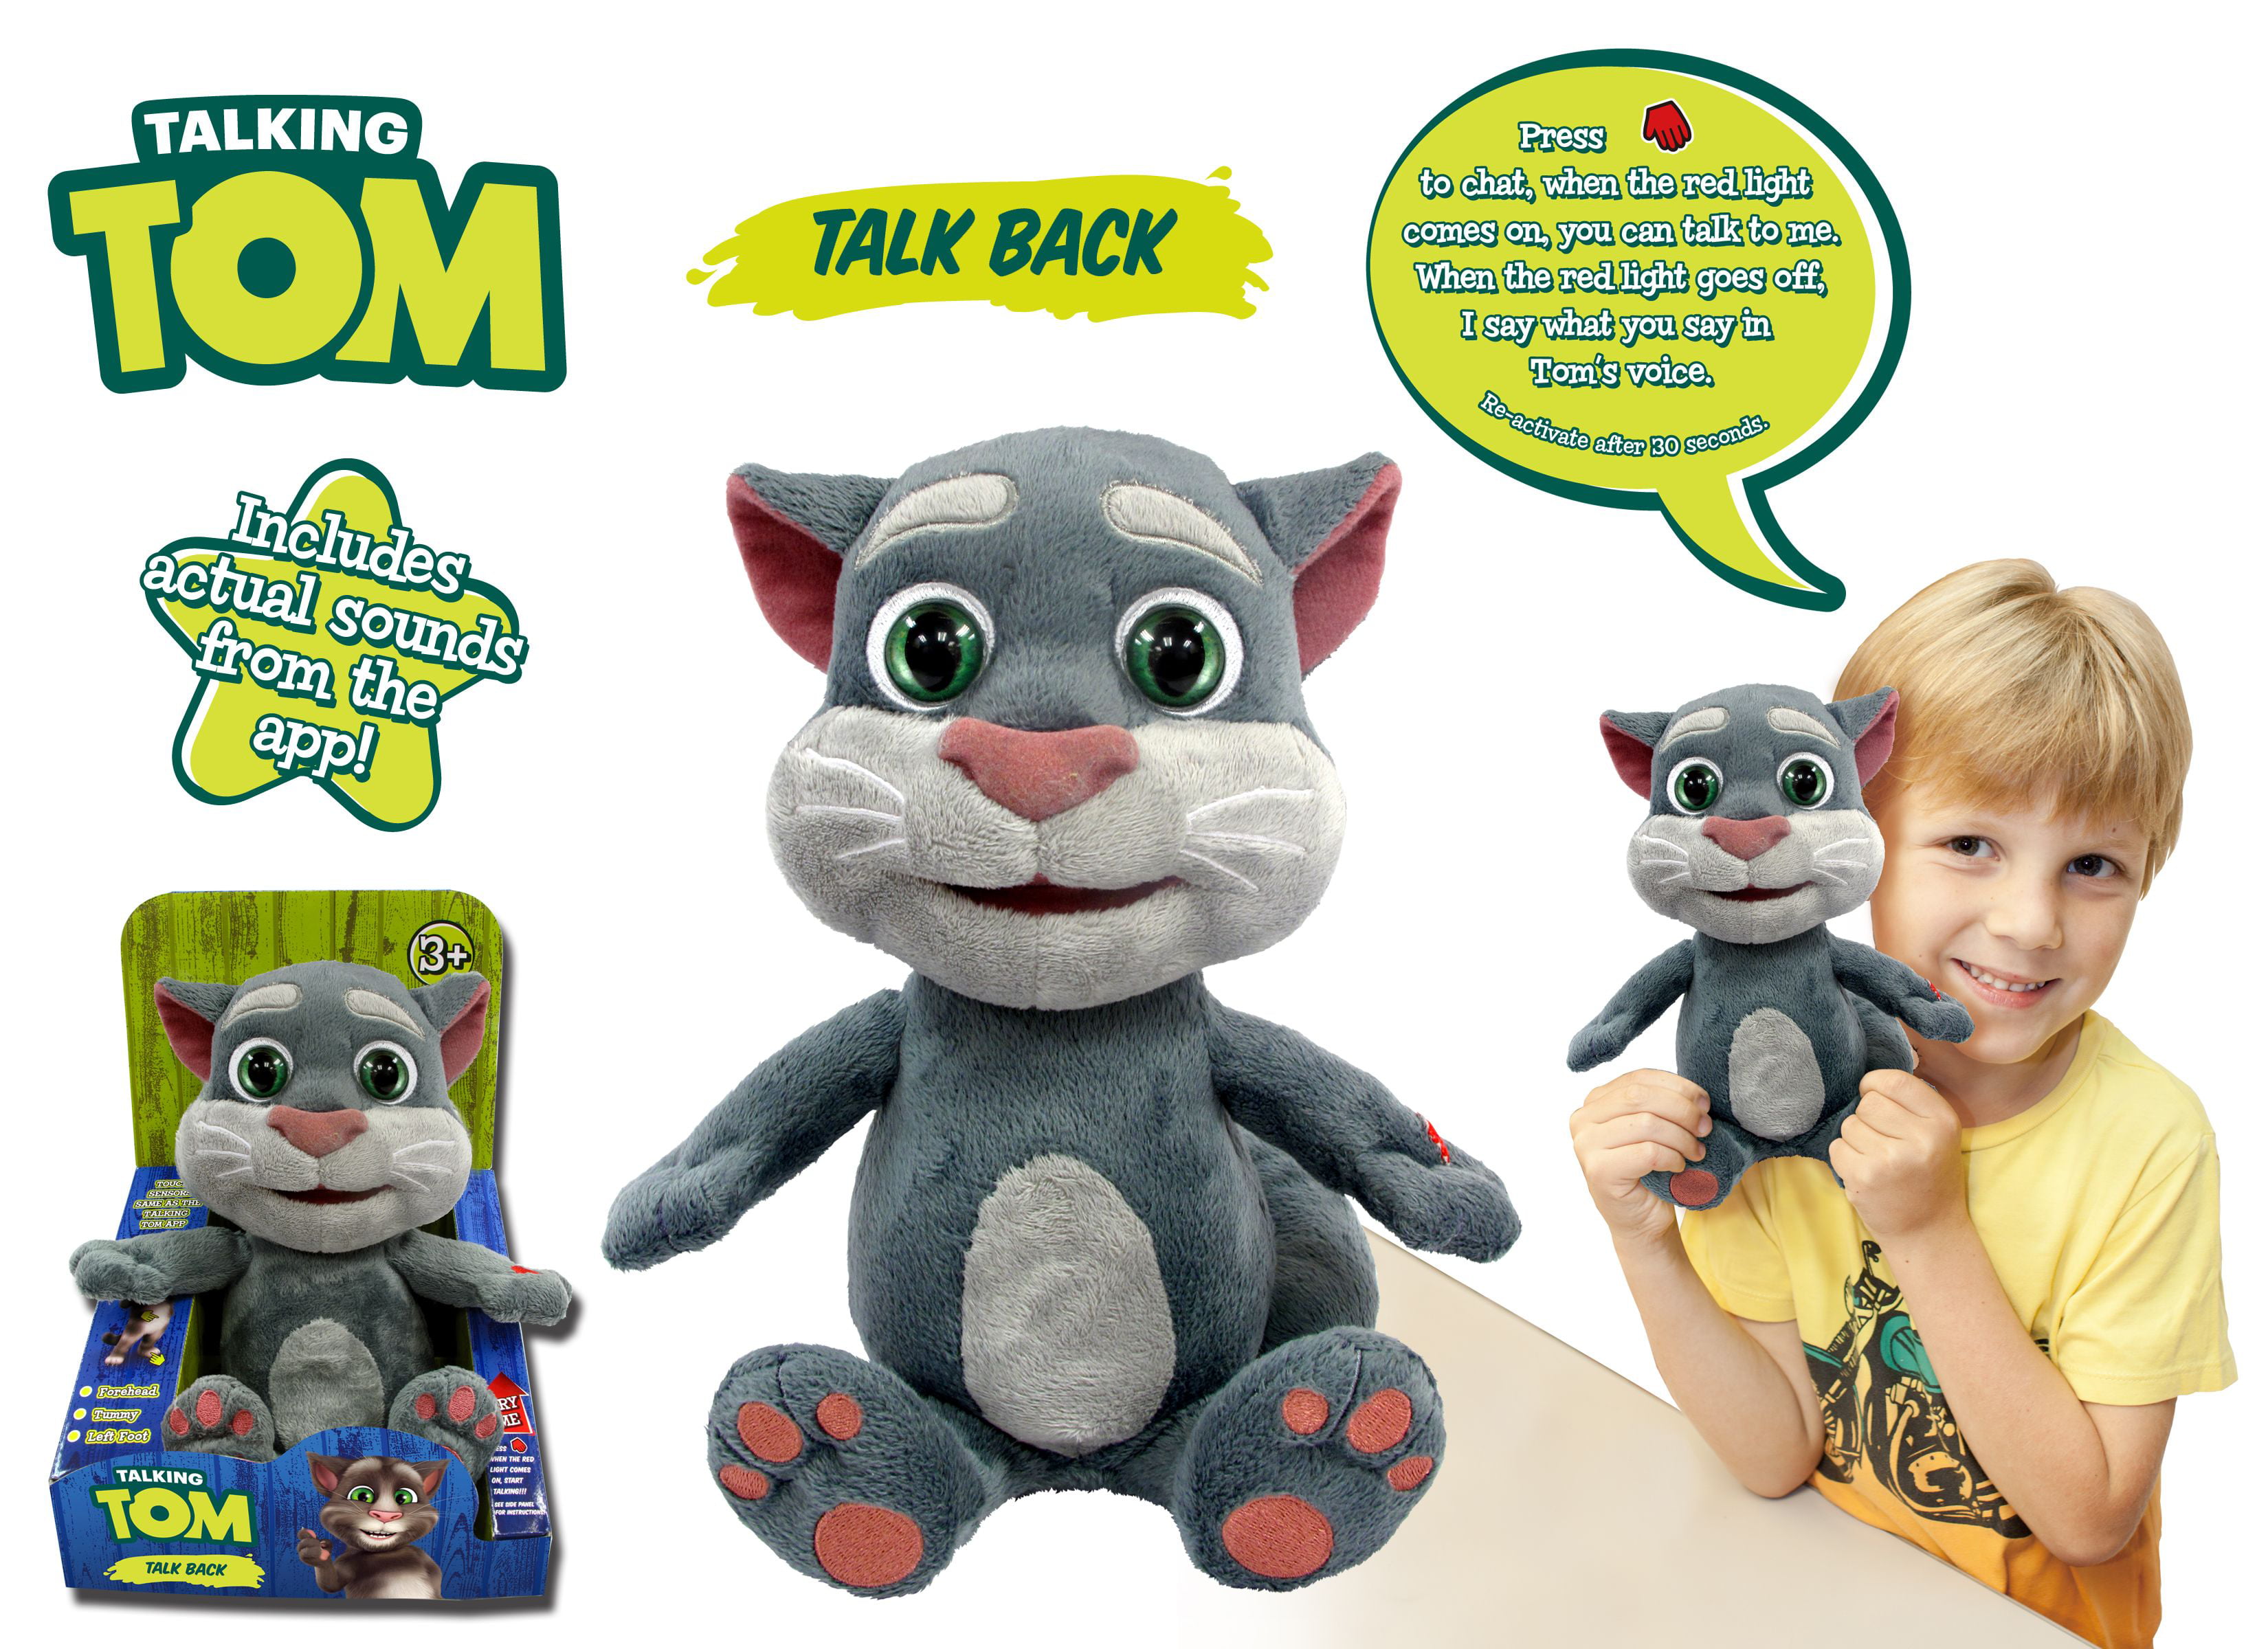 Plush Talking Tom 10" Toy Repeats What You Say Interactive Talk Voice Record 